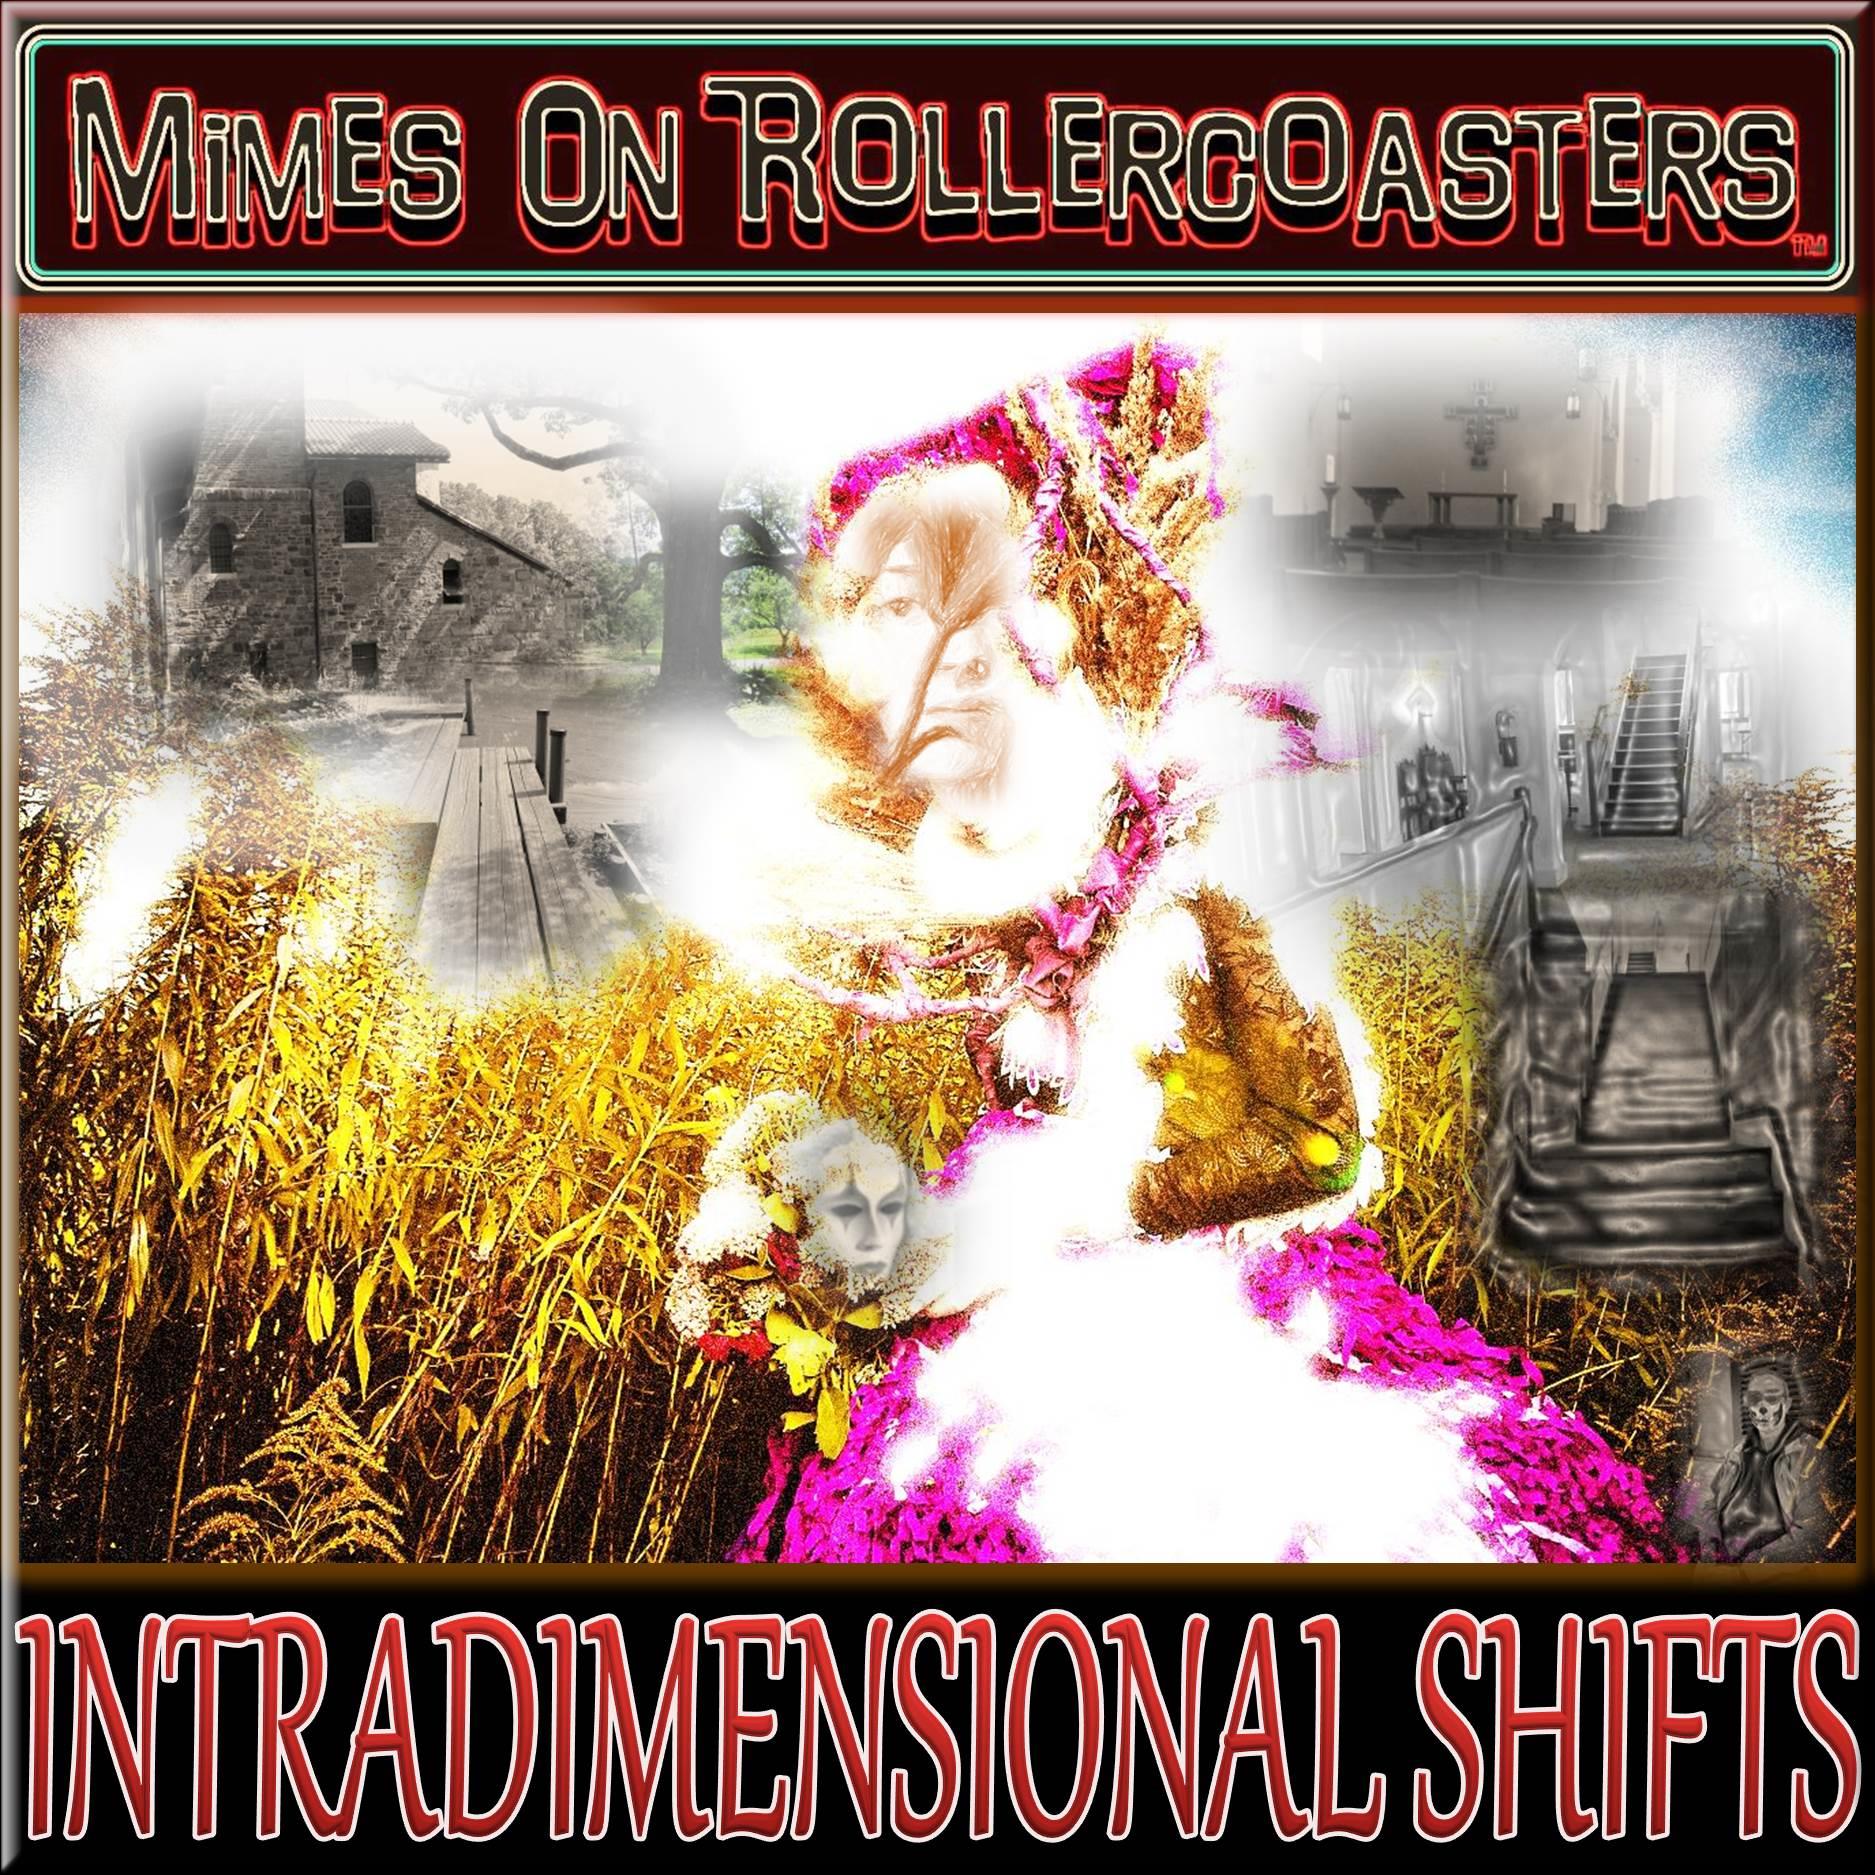 View Intradimensional Shifts on YouTube